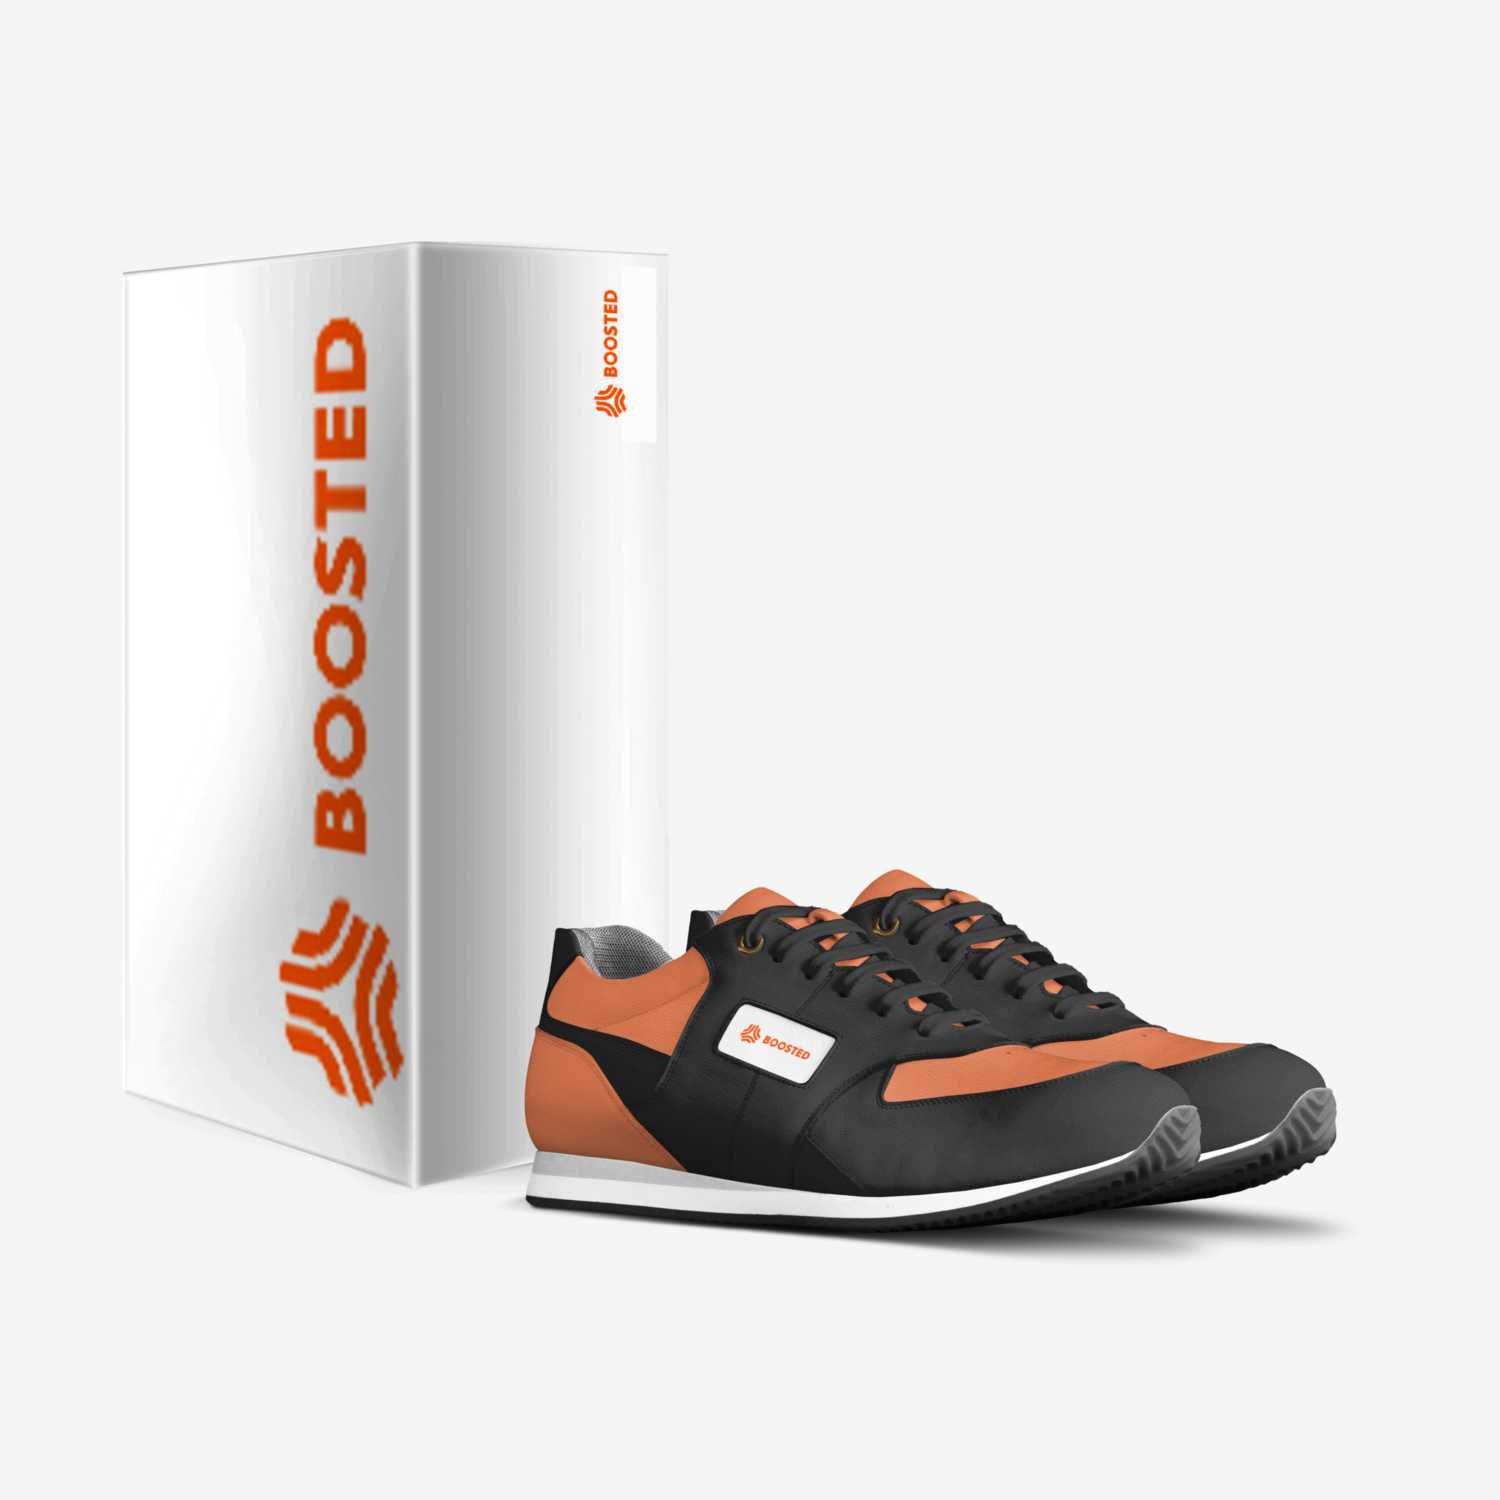 Boosted board shoe custom made in Italy shoes by Cjinmn Jedji | Box view